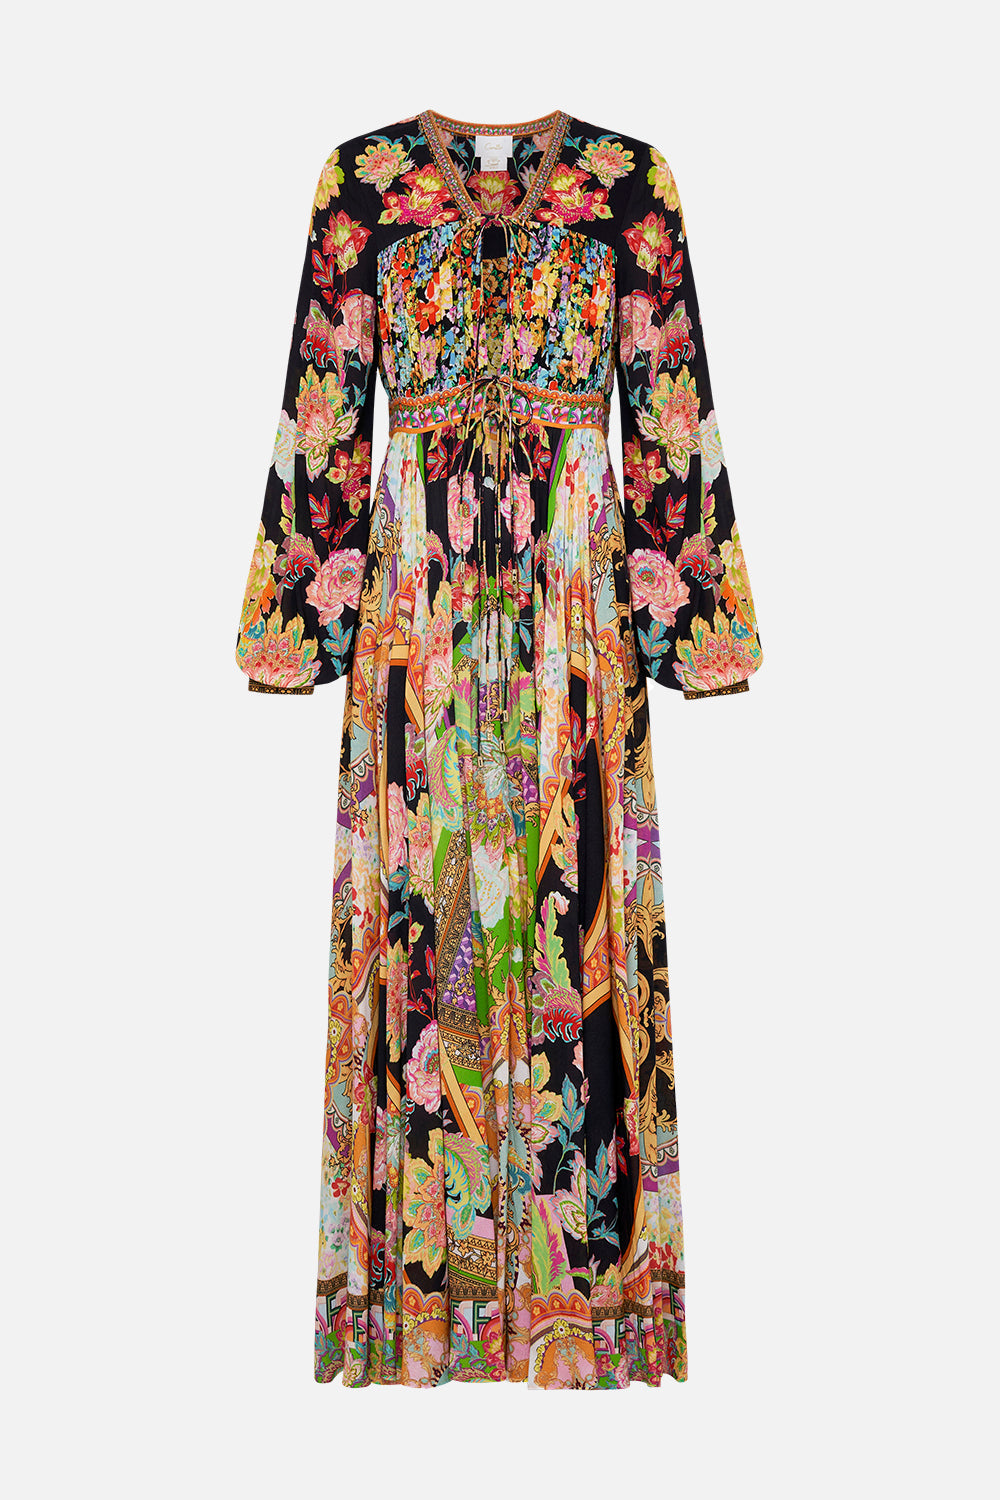 Product view of CAMILLA long dress in Sundowners in Sicily print 